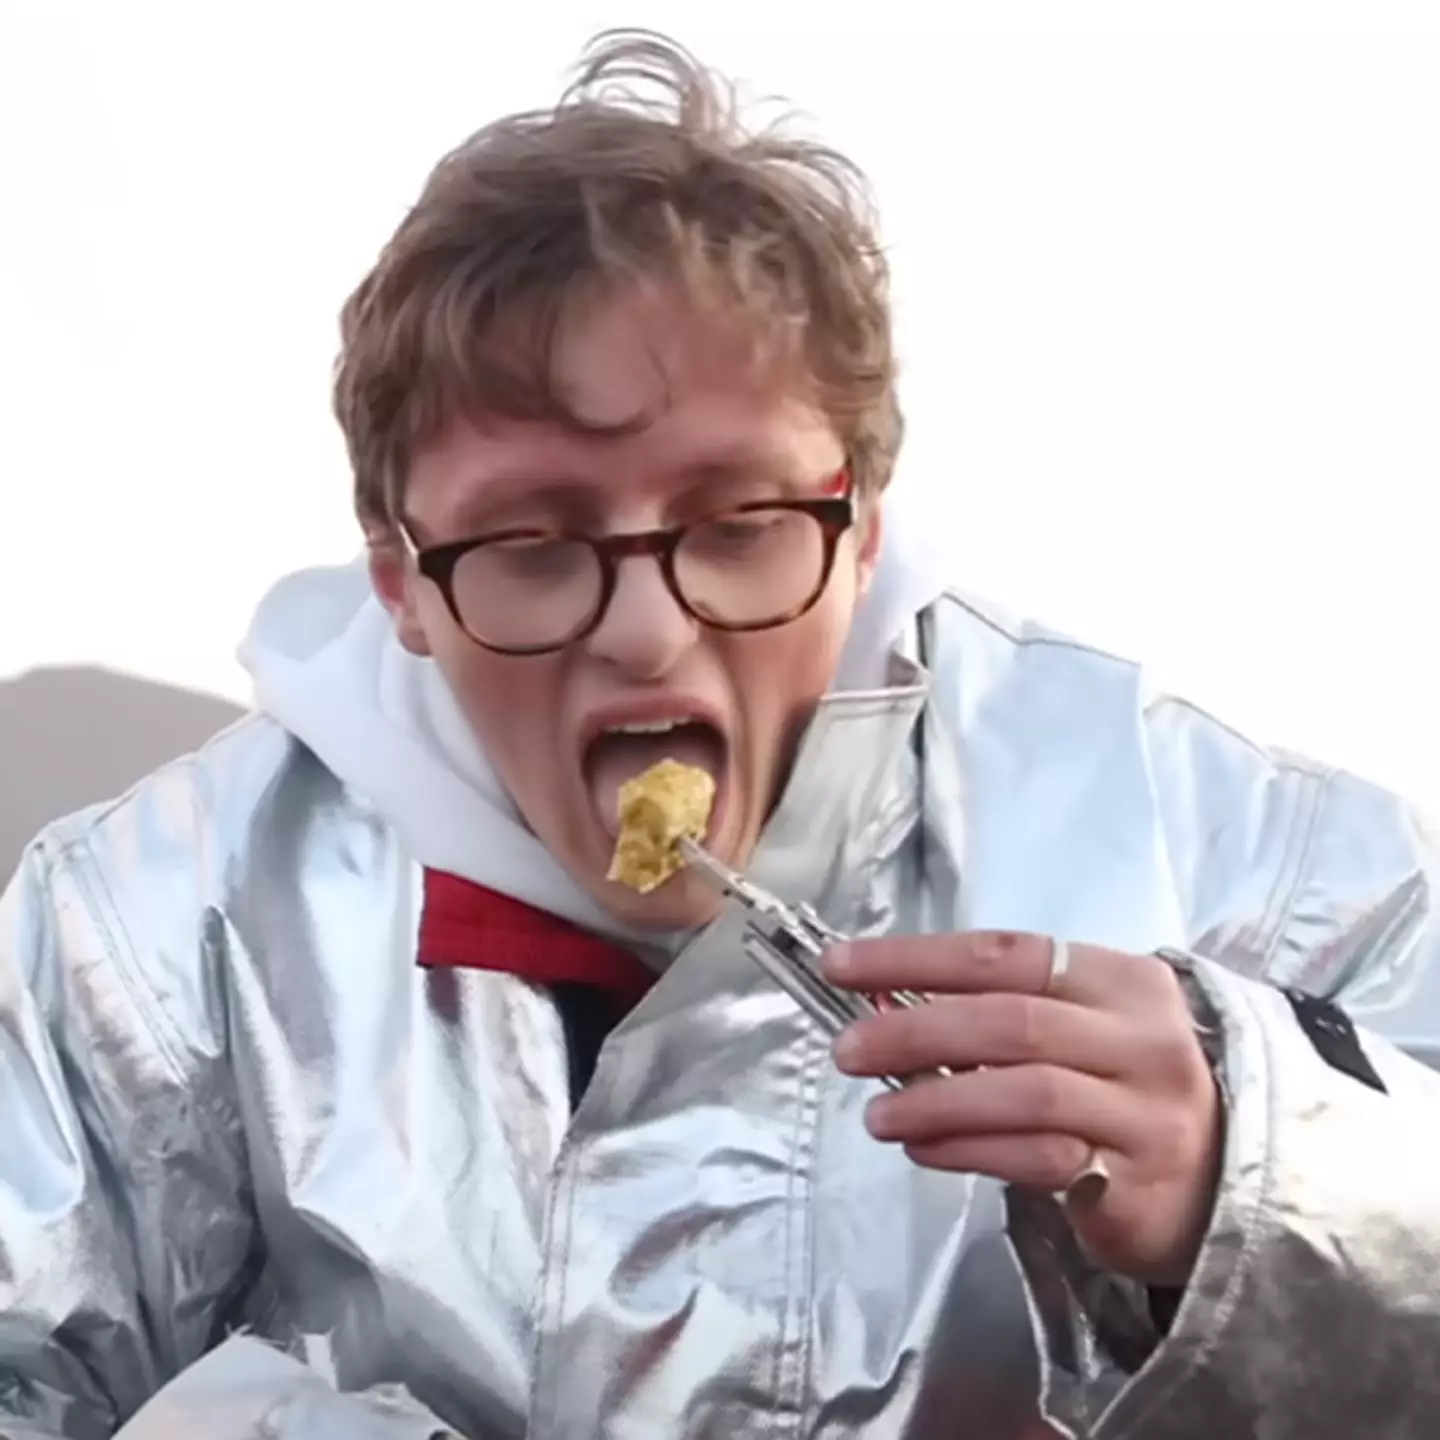 Man travels over 1,000 miles to cook a frozen ready meal on an active volcano